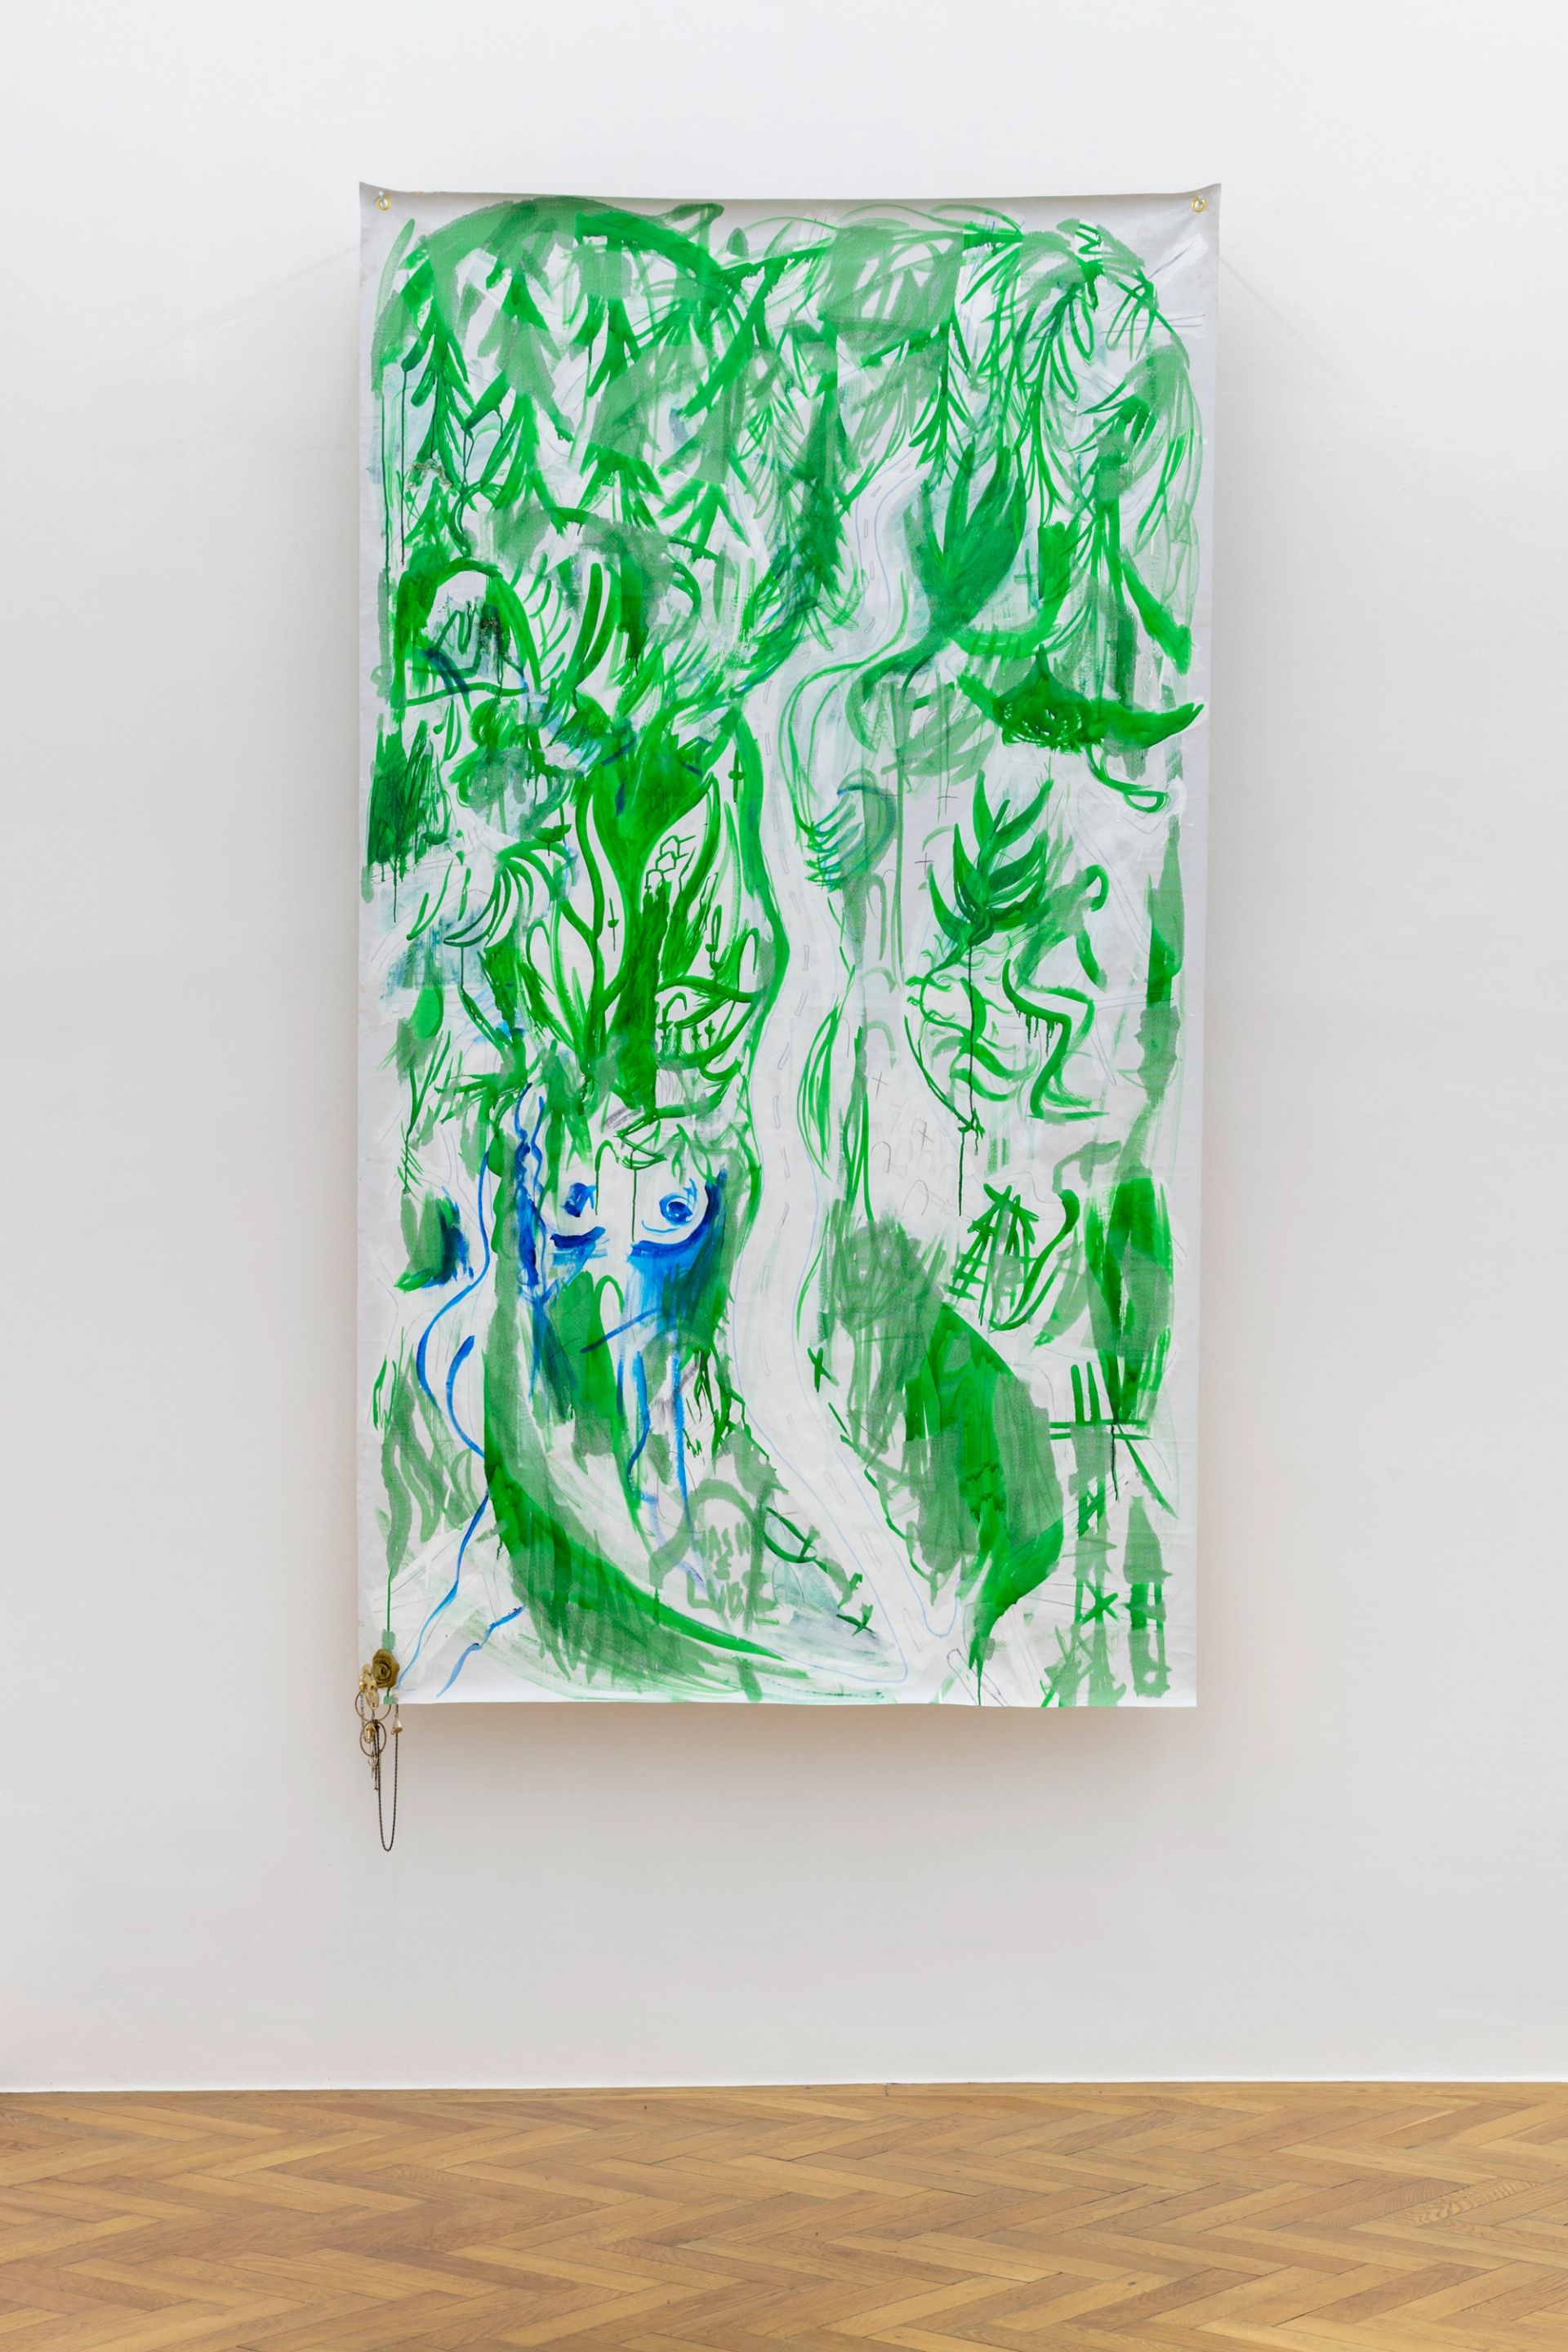 Anna McCarthy, Evergreens Cemetery (Overgrown), 2022, acrylic, ink, permanent marker, Old Man’s Beard, stainless steel, brass, pencil on canvas and vinyl, 250 x 136 cm